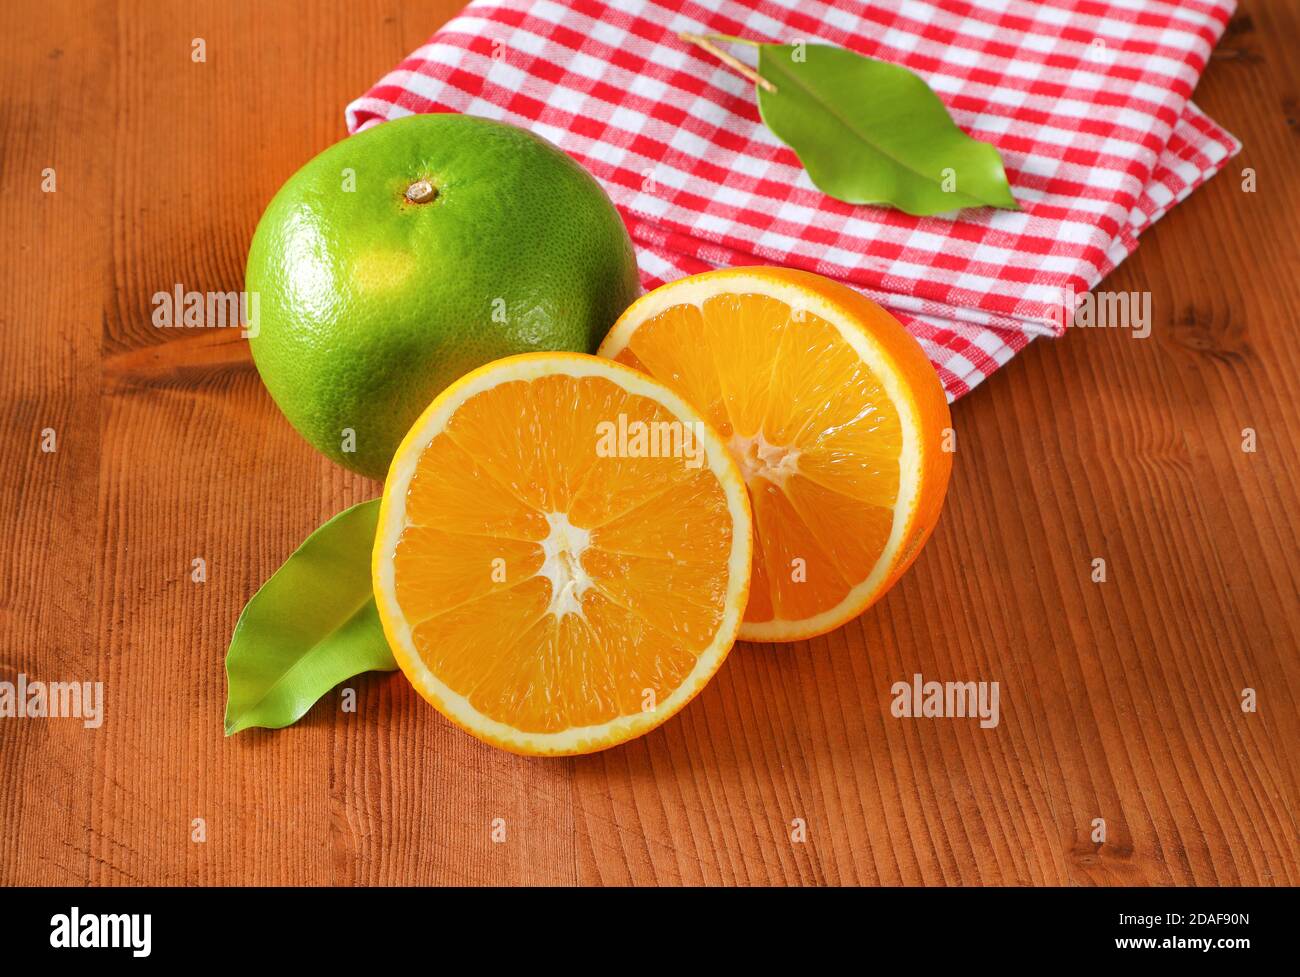 Green grapefruit (sweetie, pomelit, oroblanco), two orange halves and checked red and white tea towel on wooden table Stock Photo